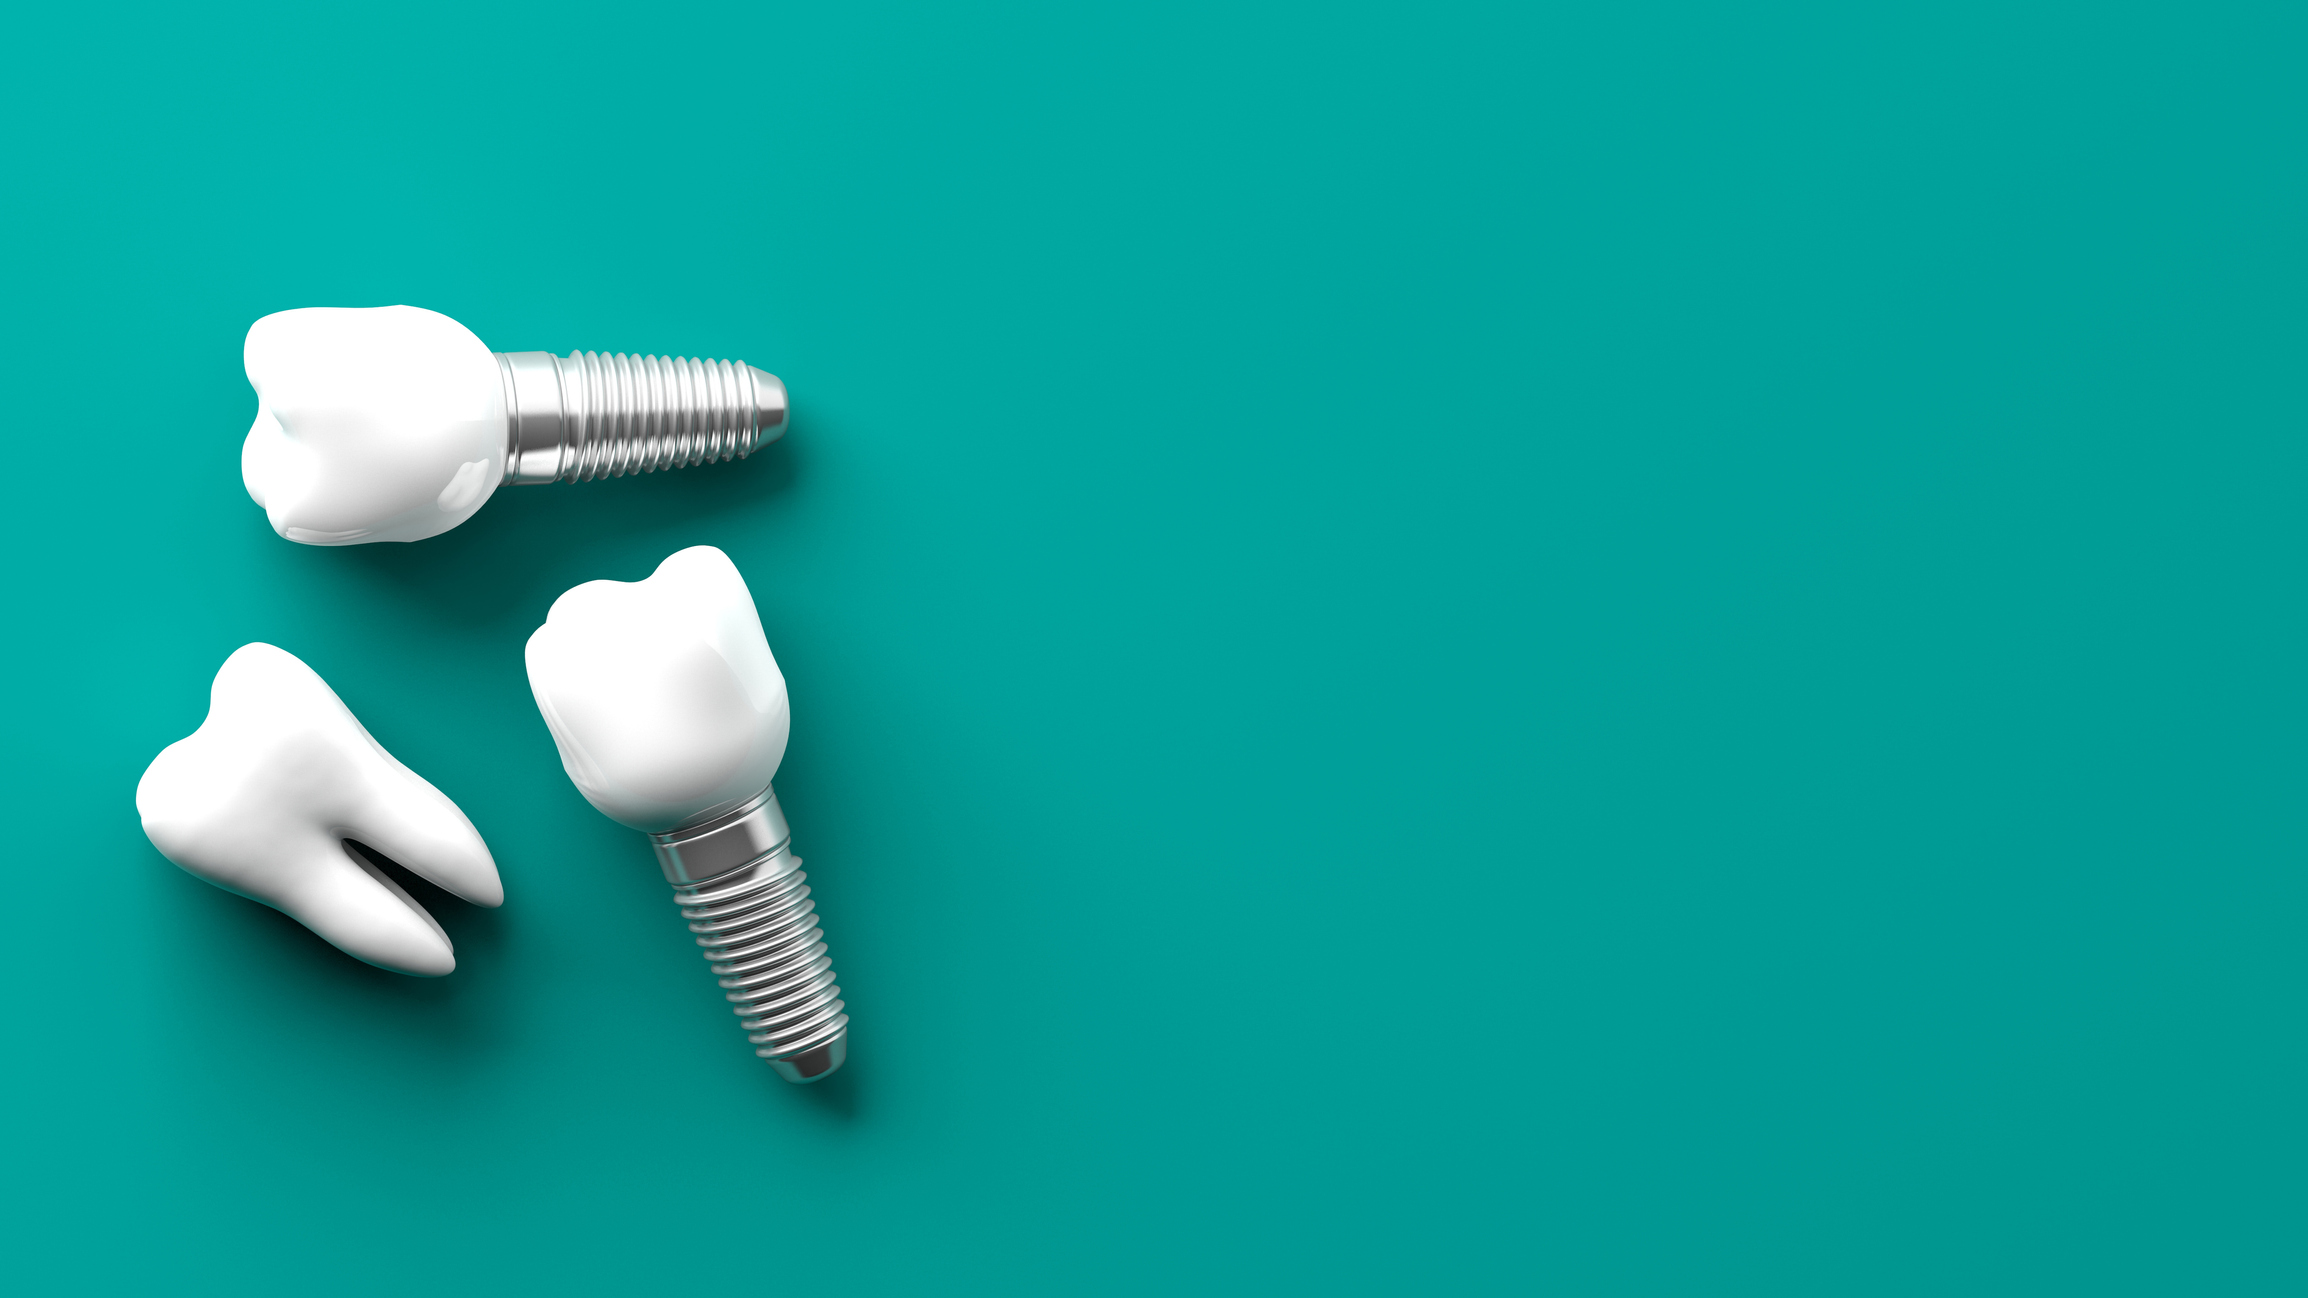 A tooth and two dental implants are isolated on a teal background.